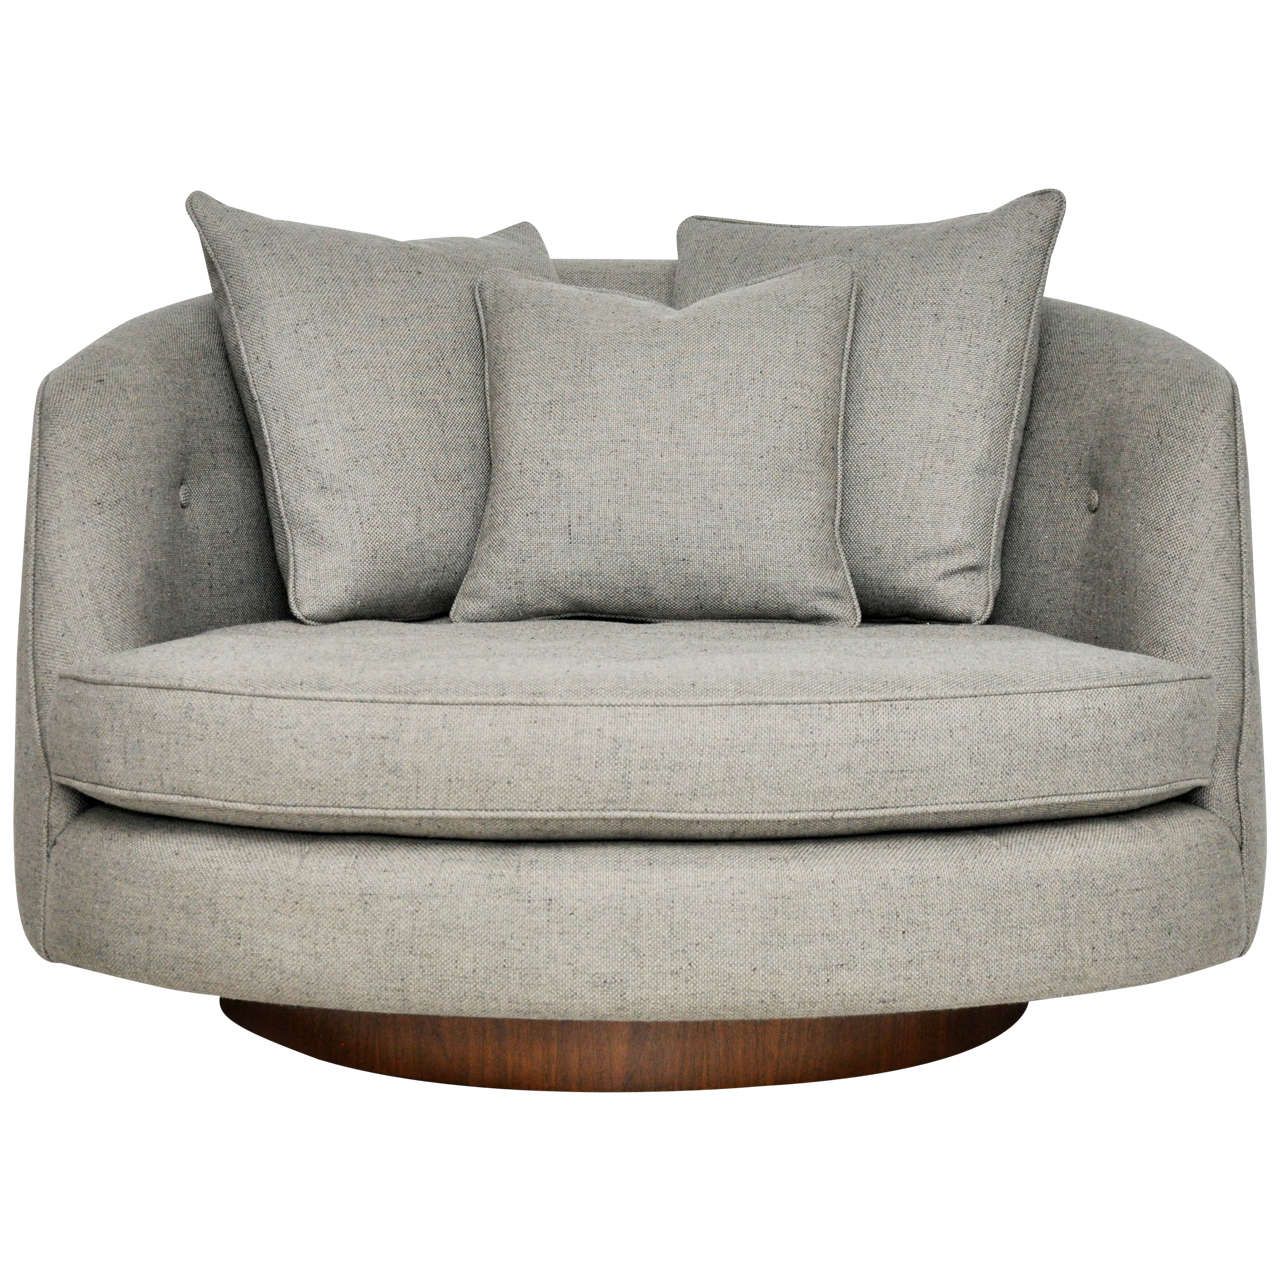 Large Swivel Chair for Your Home